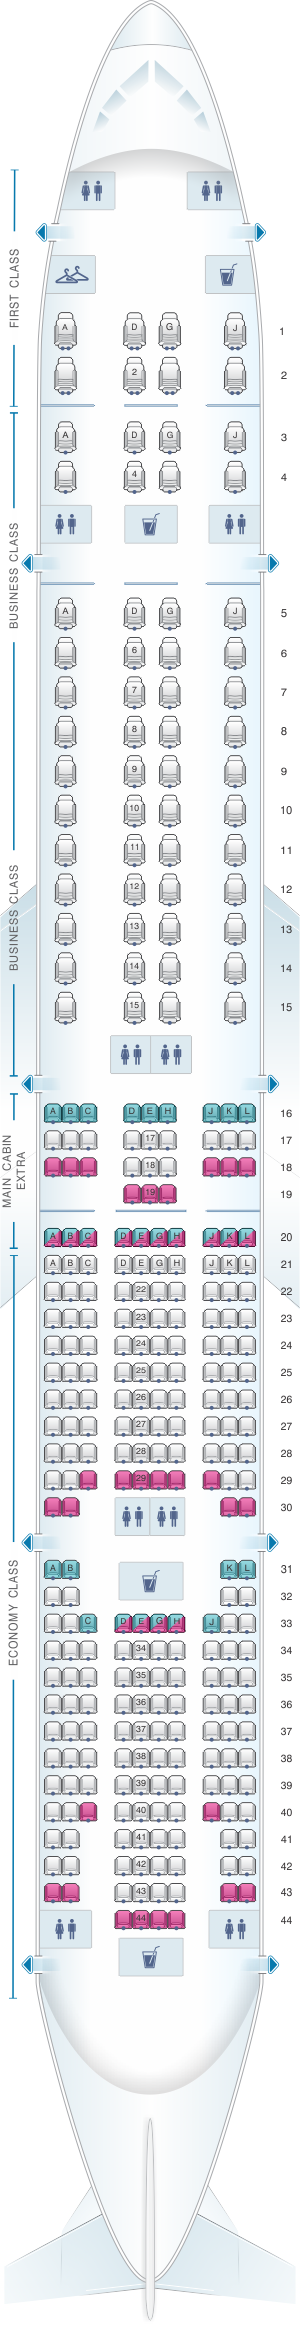 american airlines 777 seat map